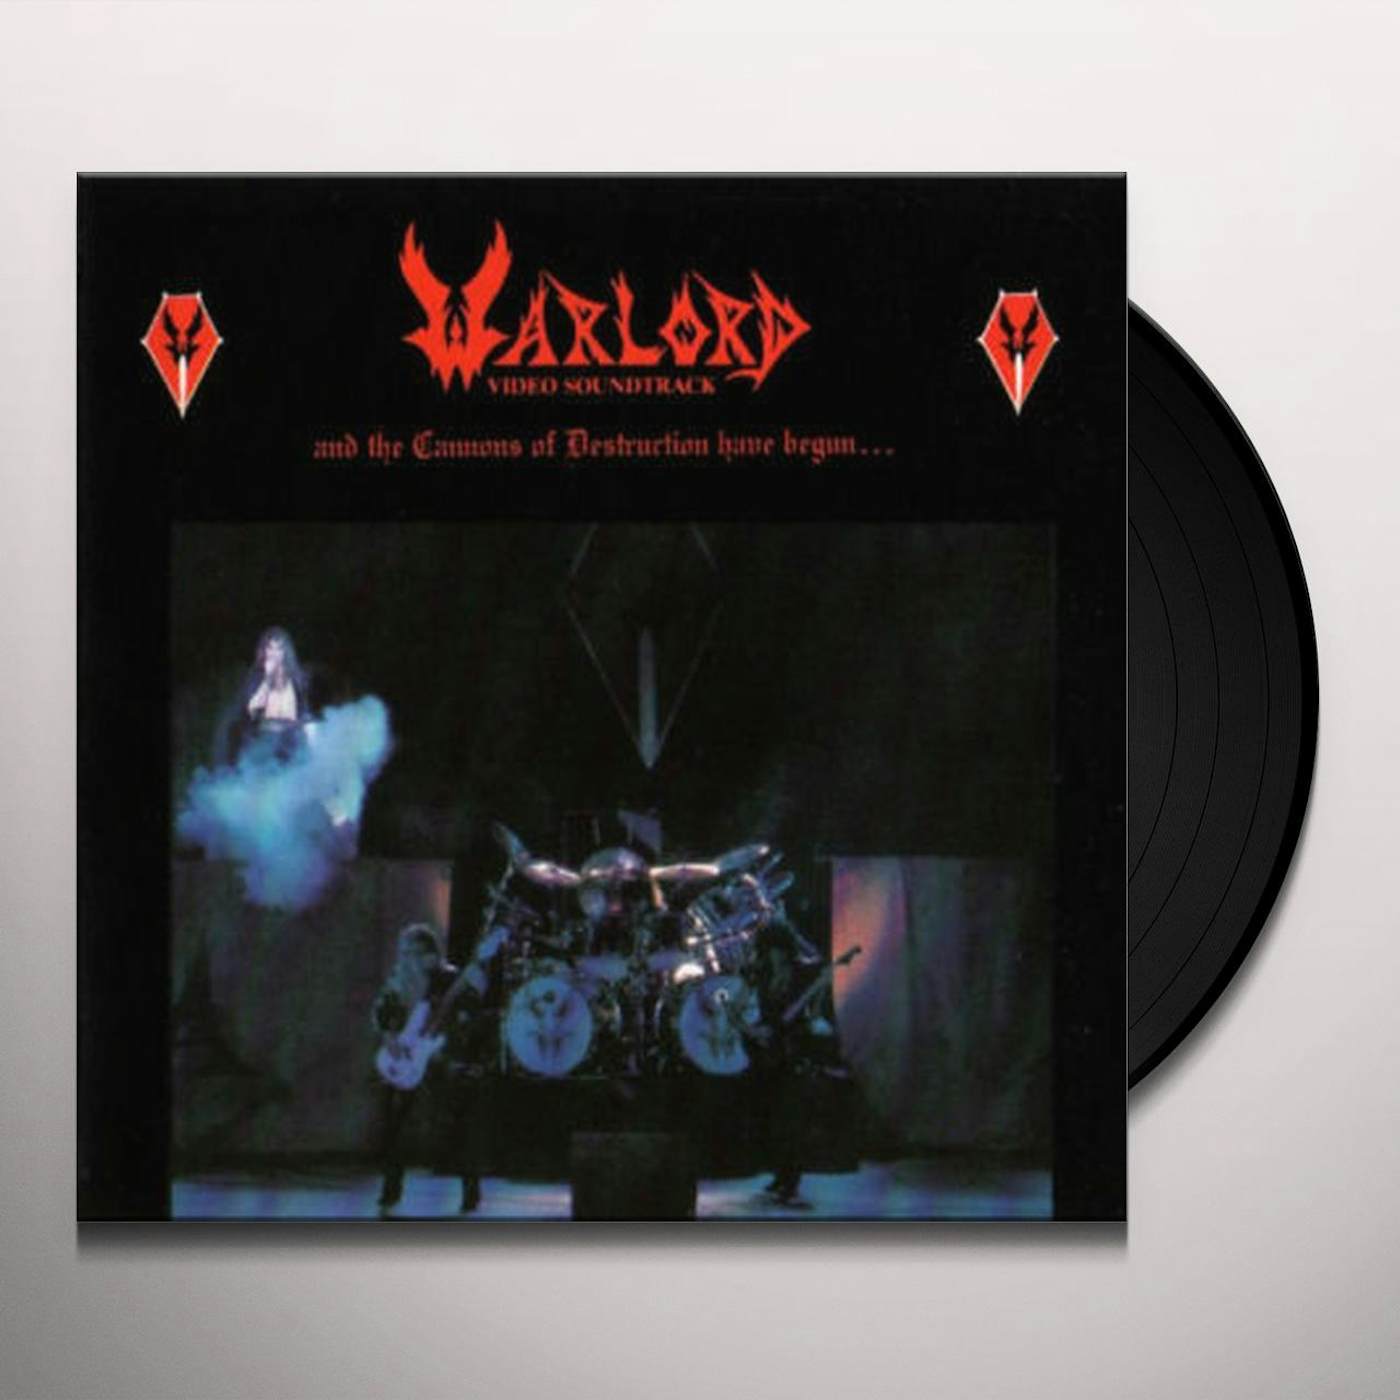 Warlord CANNONS OF DESTRUCTION HAVE BEGUN Vinyl Record